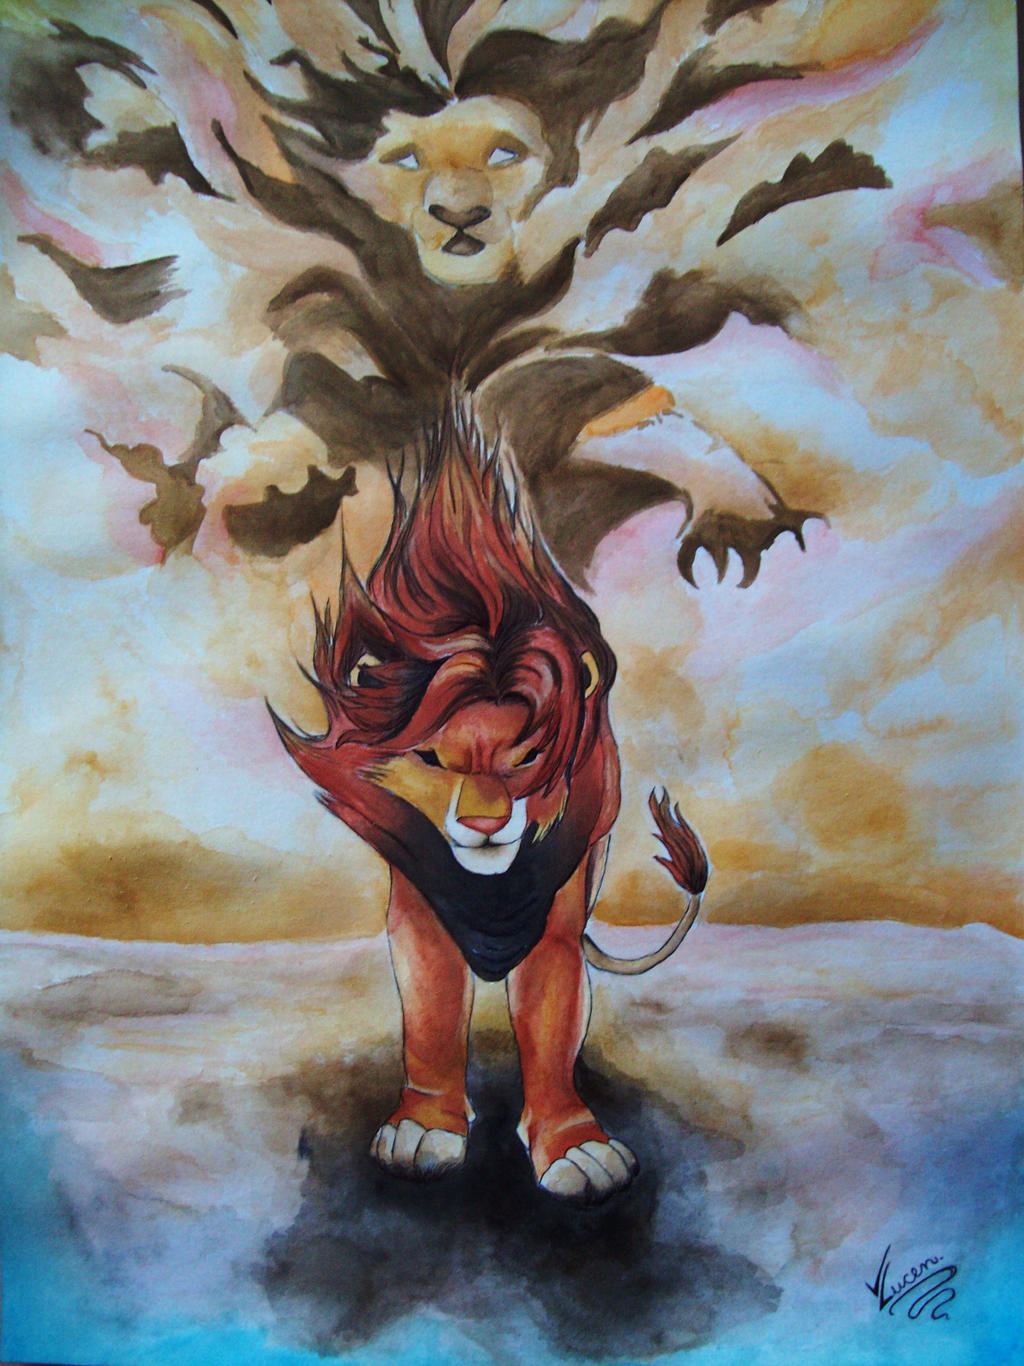 The Lion King. Simba and Mufasa. by Vii-Dragon on DeviantArt